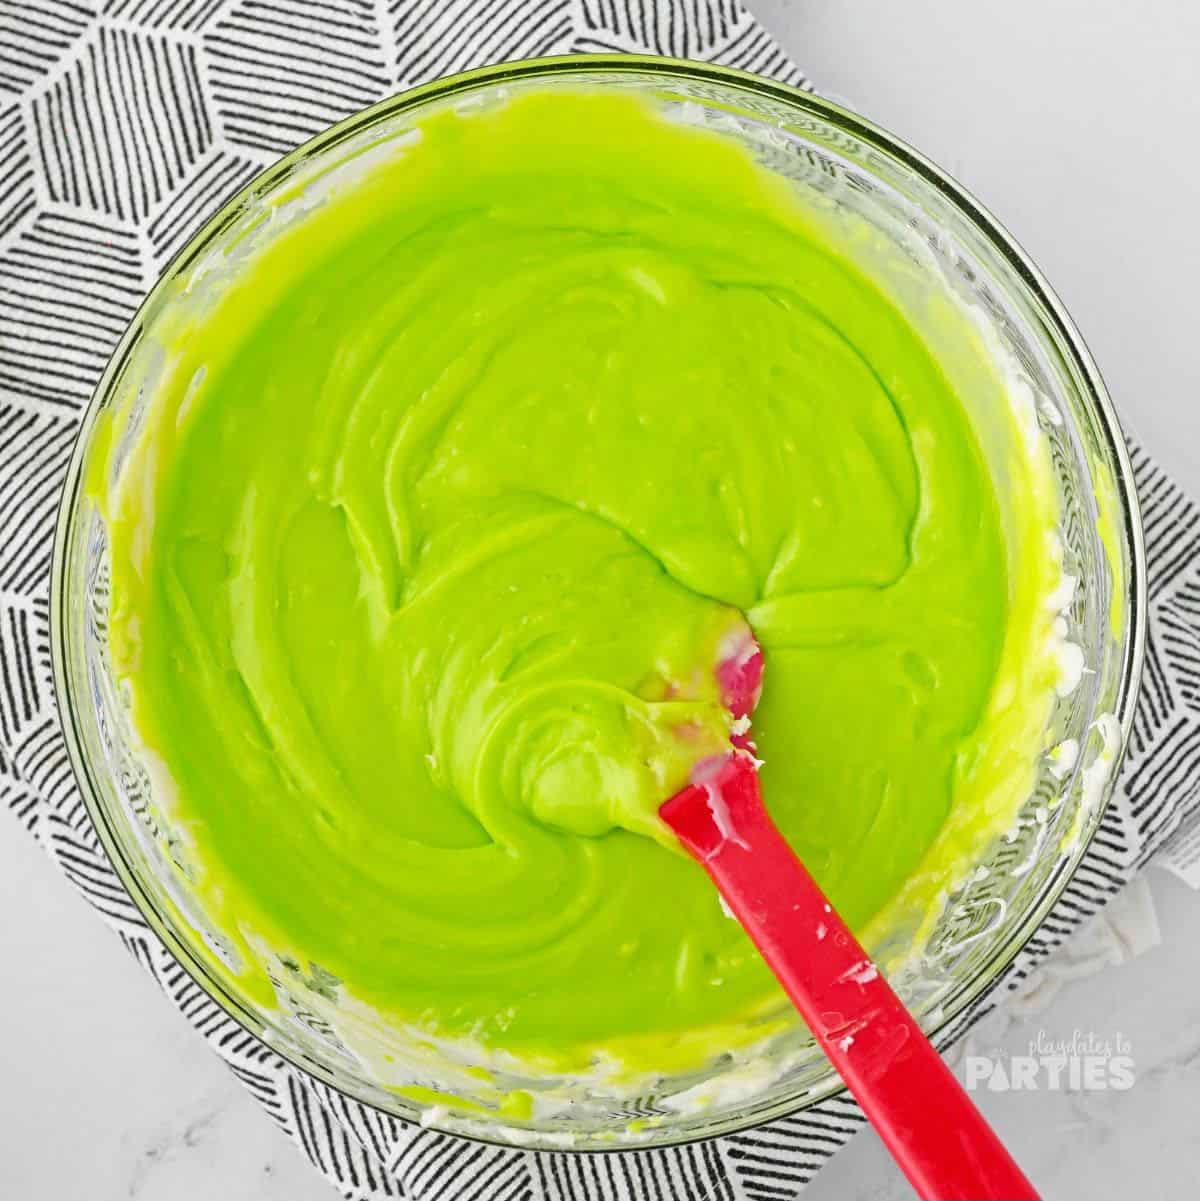 Melted chocolate and condensed milk are tinted a bright green hue.